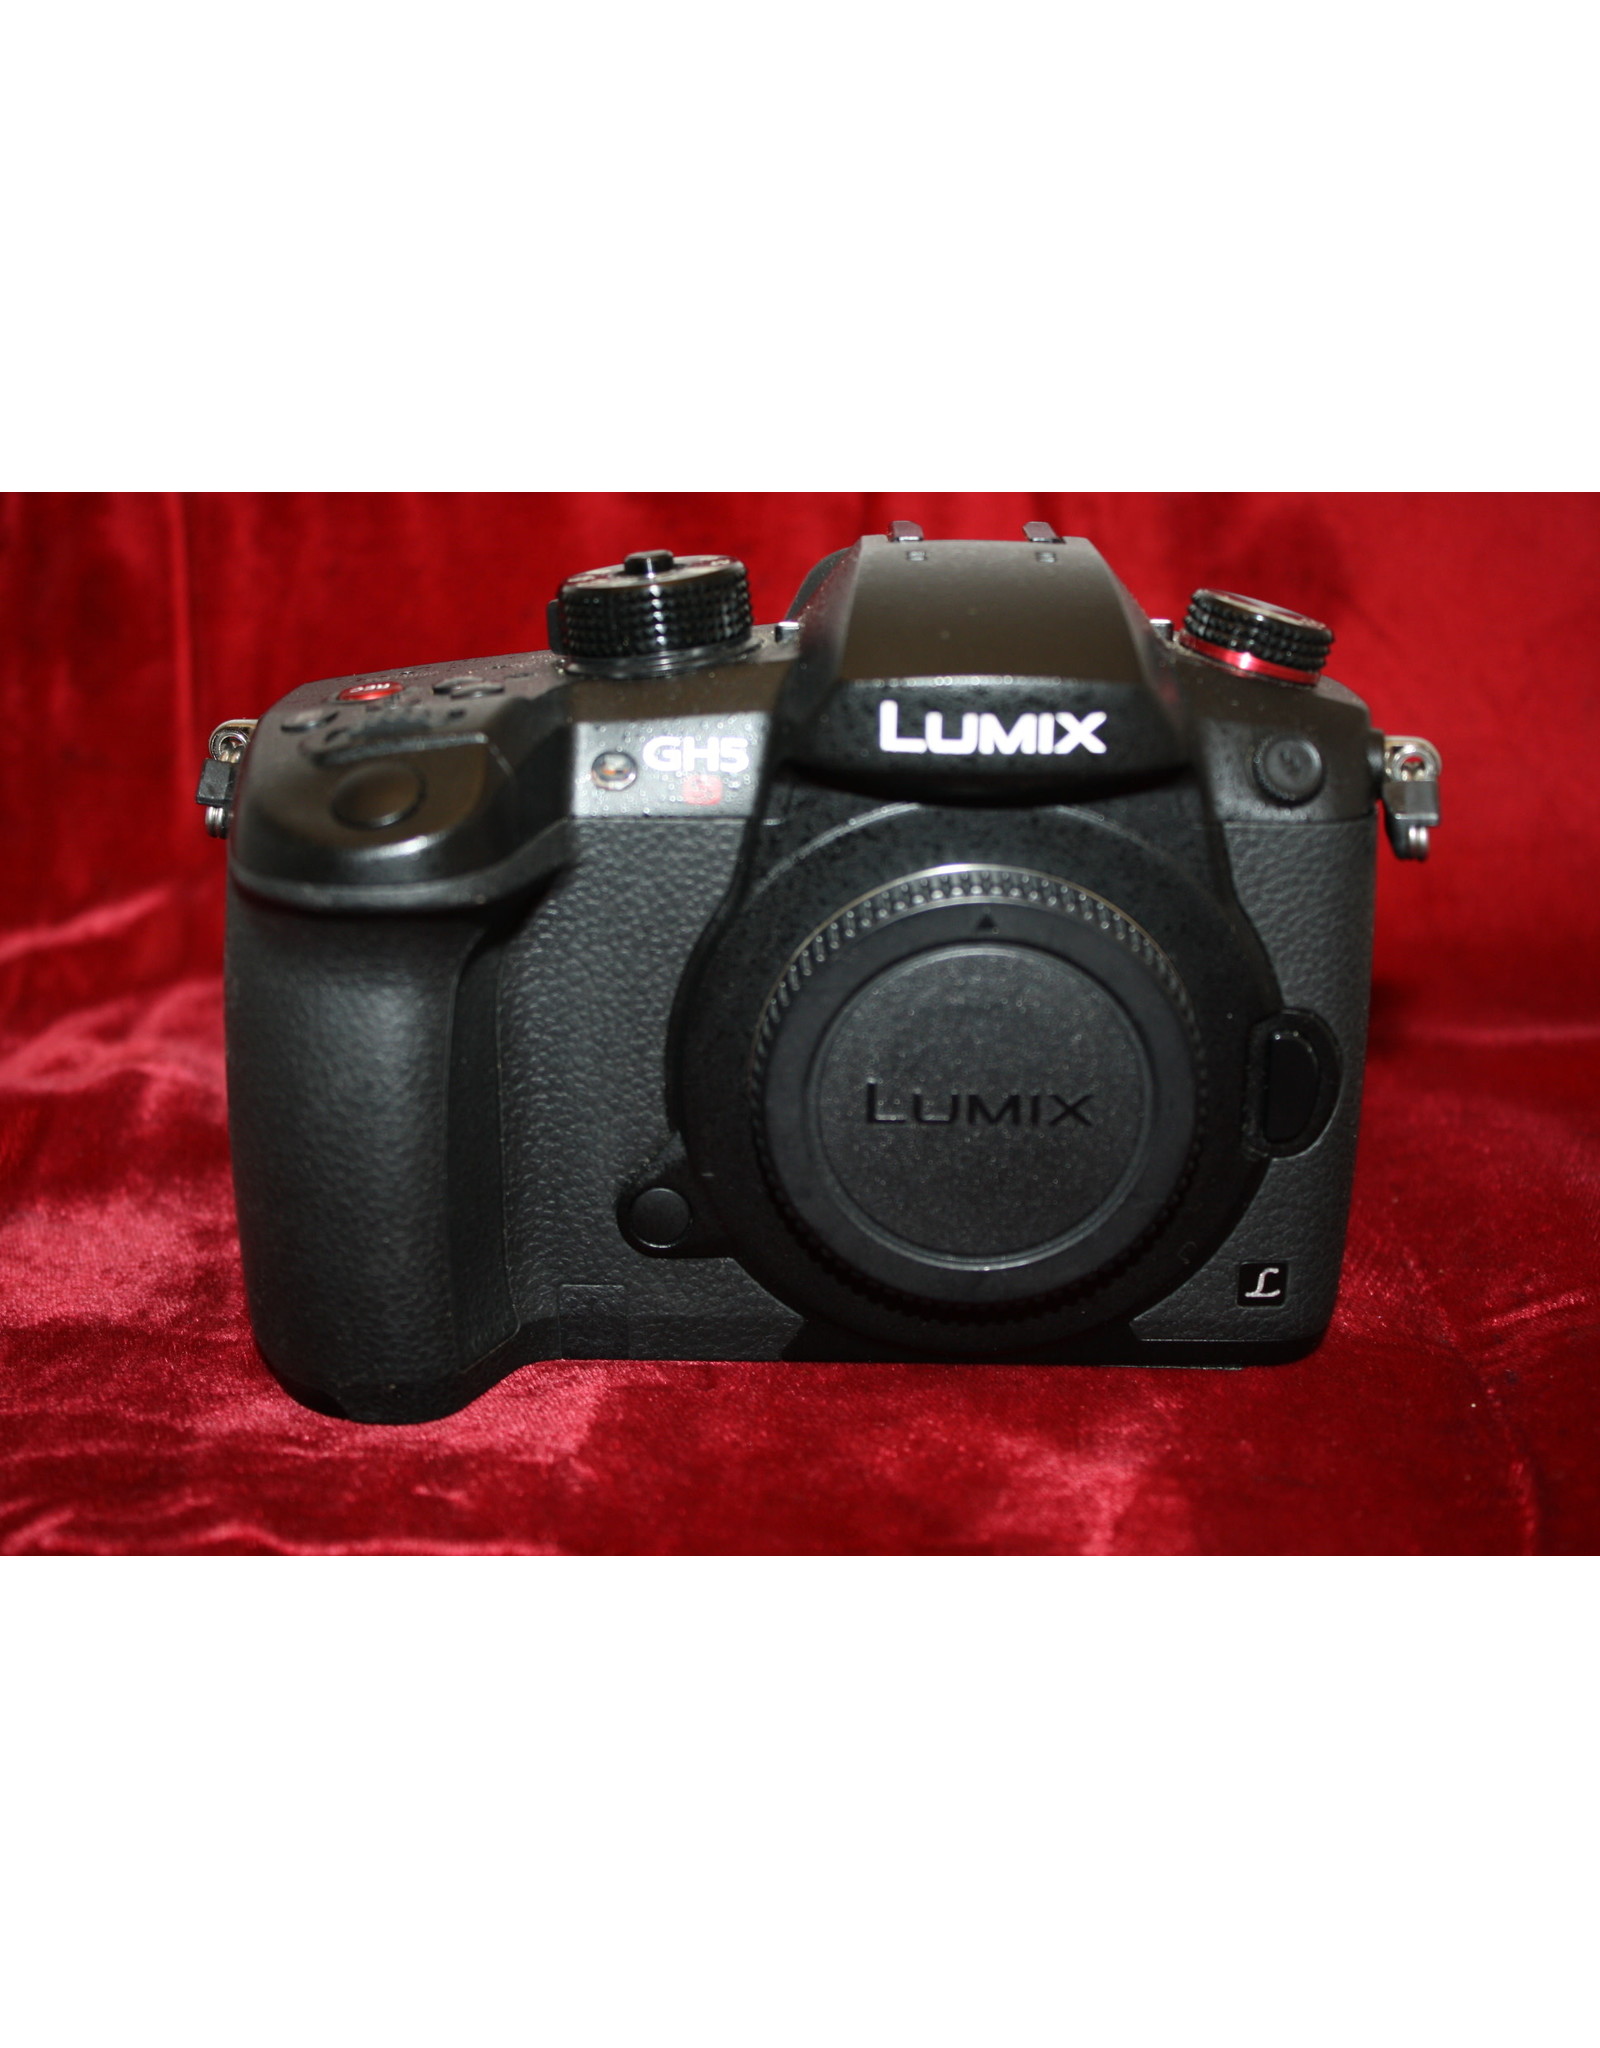 PANASONIC LUMIX DC-GH5S MIRRORLESS MICRO FOUR THIRDS 4K DIGITAL CAMERA Body Only w/3 and - Camera Concepts & Solutions